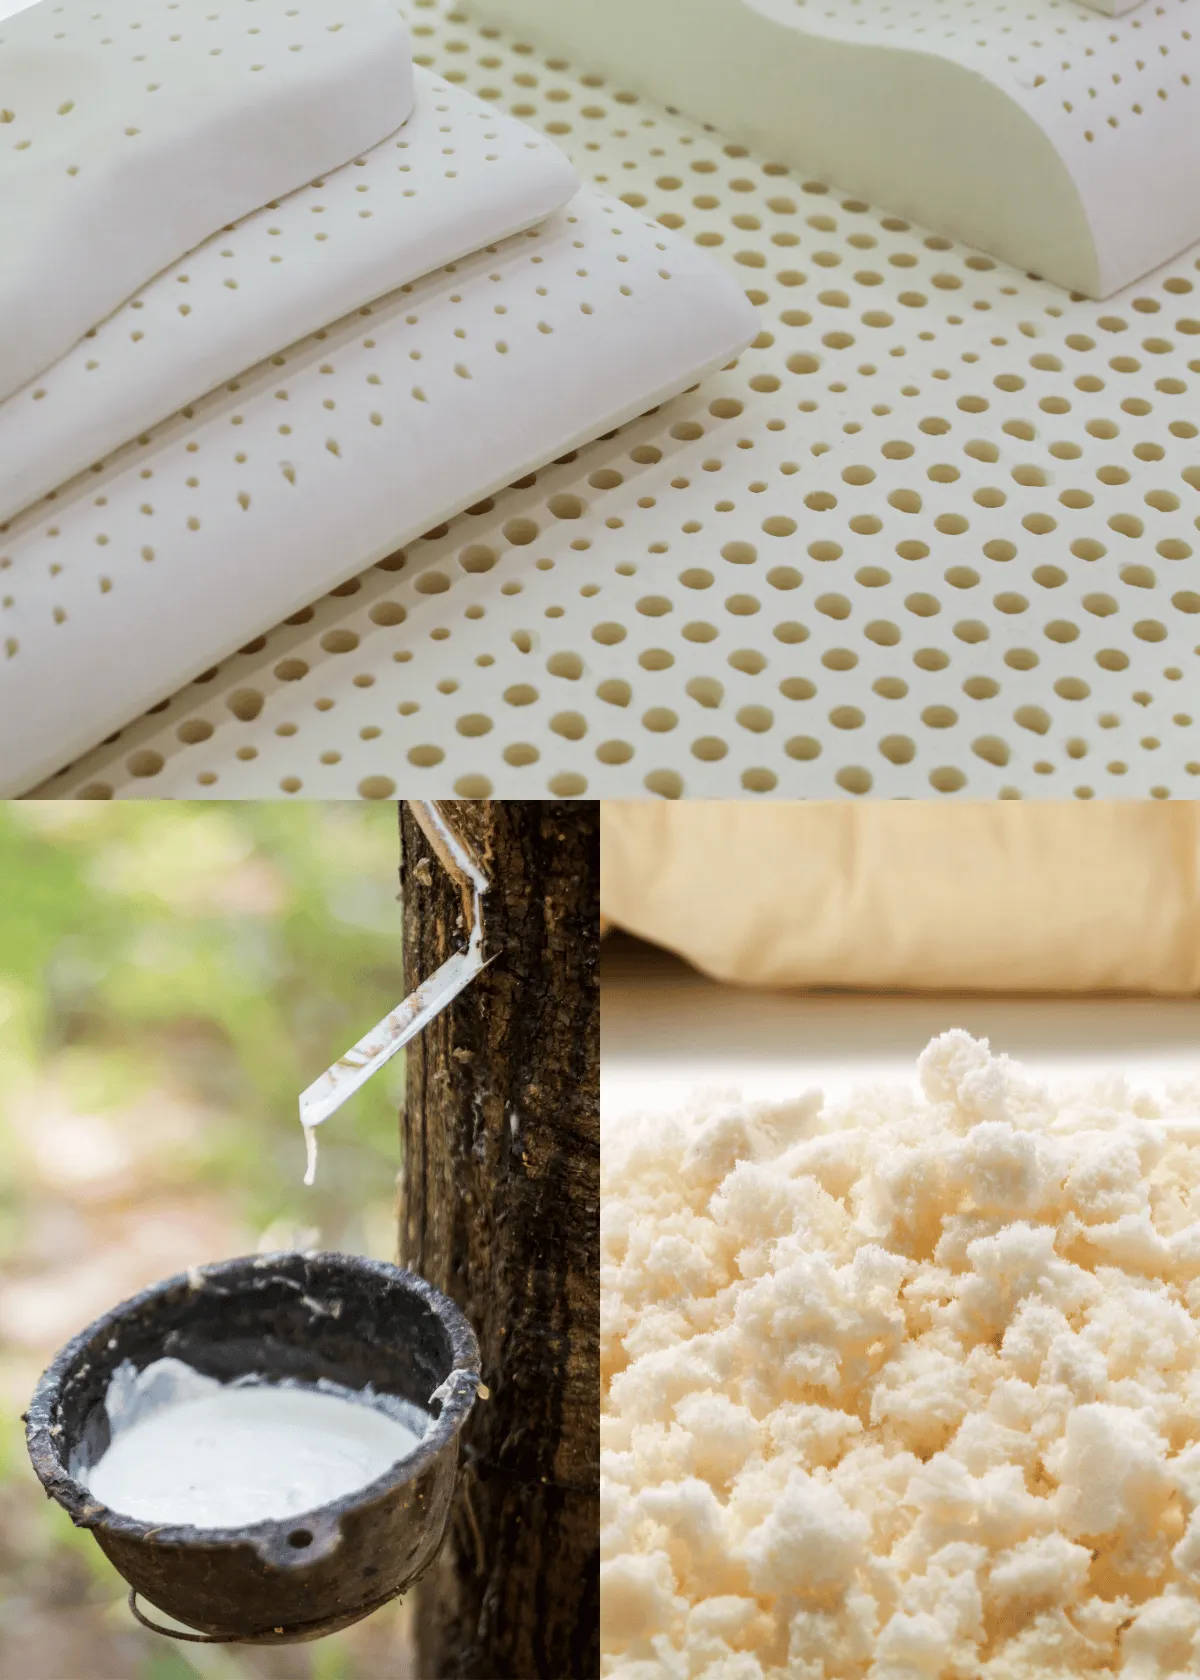 "The Difference Between Dunlop and Talalay Latex Mattresses"